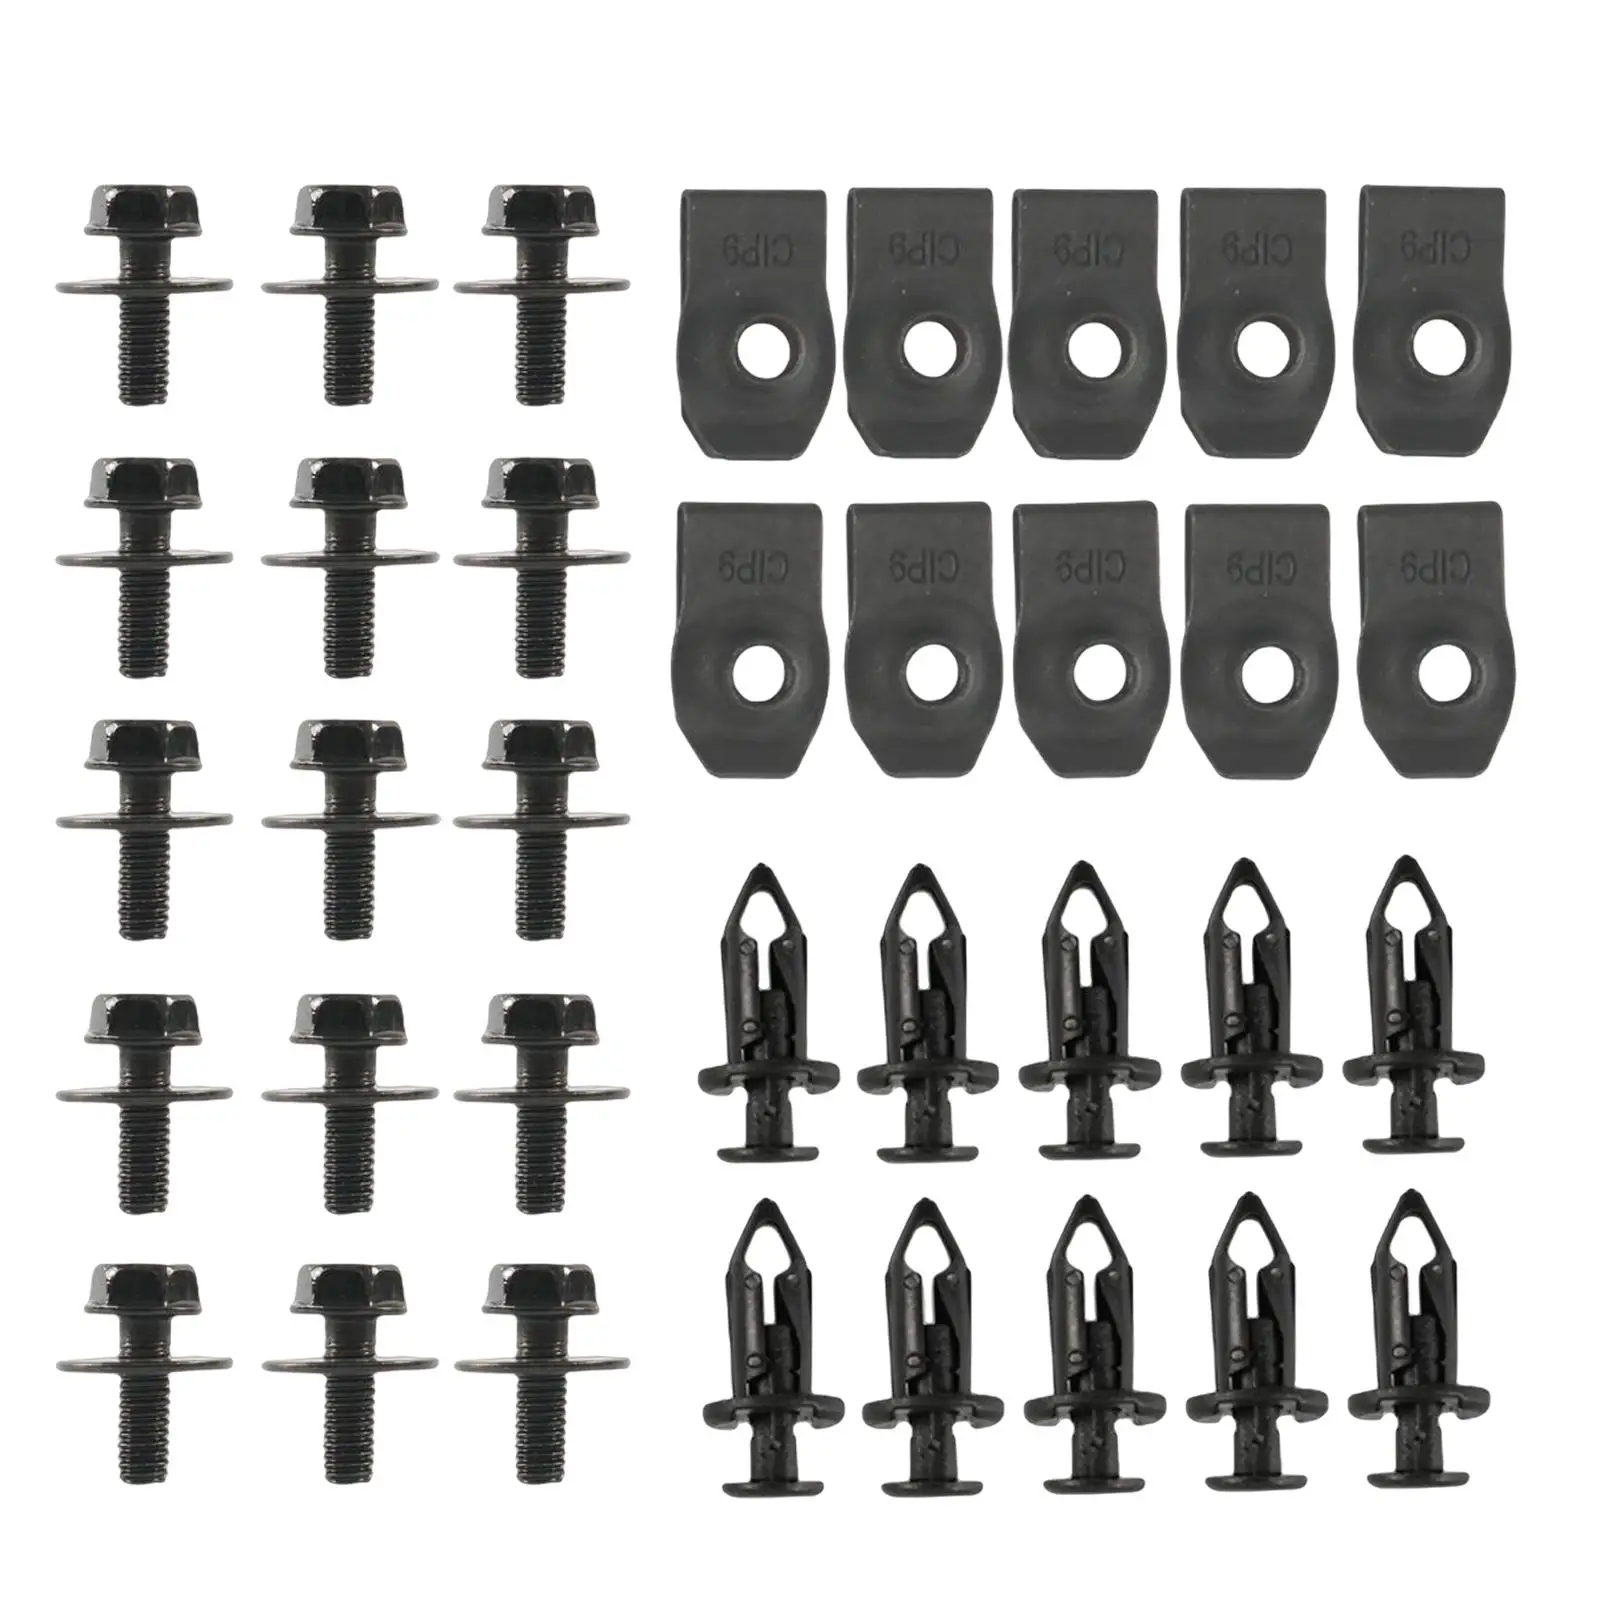 35x Engine Under Cover Rivet Clips Push Body Bolts Fastener Splash Shield Guard Bumper Fender Fit for G35 G37 Replaces images - 6